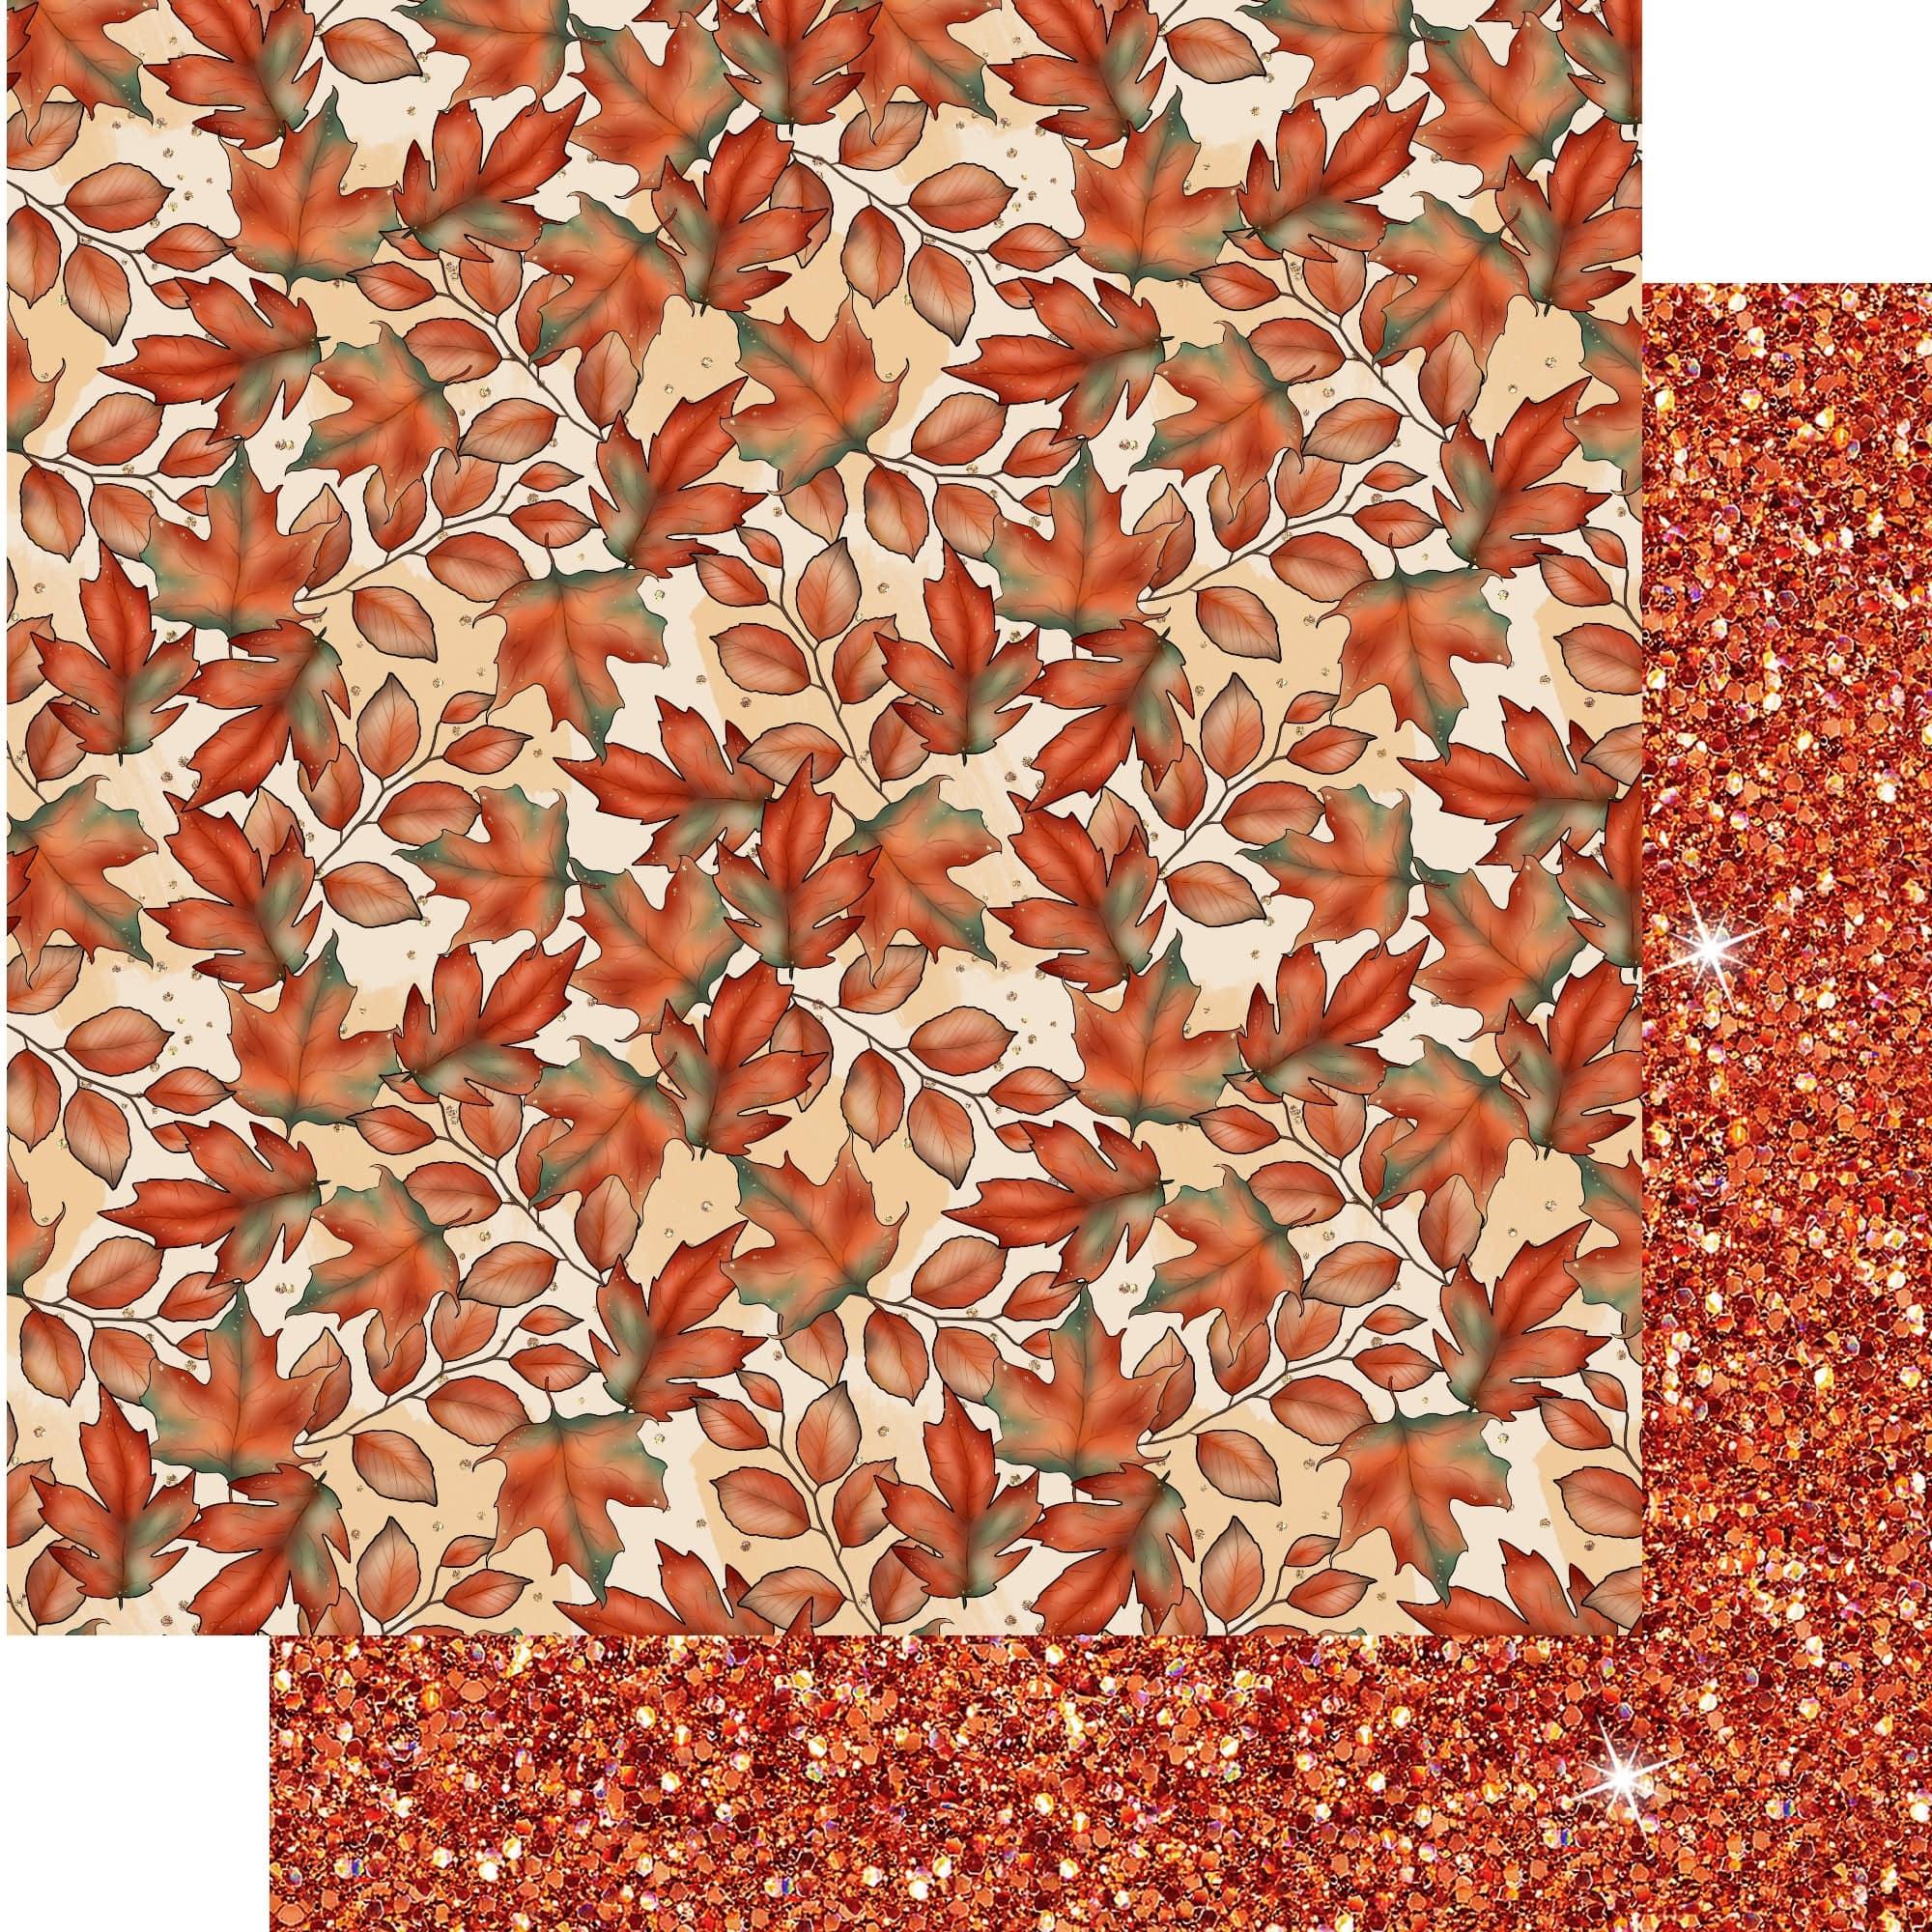 Gaynor Carradice's Autumn Favorites Collection Falling Leaves 12 x 12 Double-Sided Scrapbook Paper by SSC Designs - Scrapbook Supply Companies